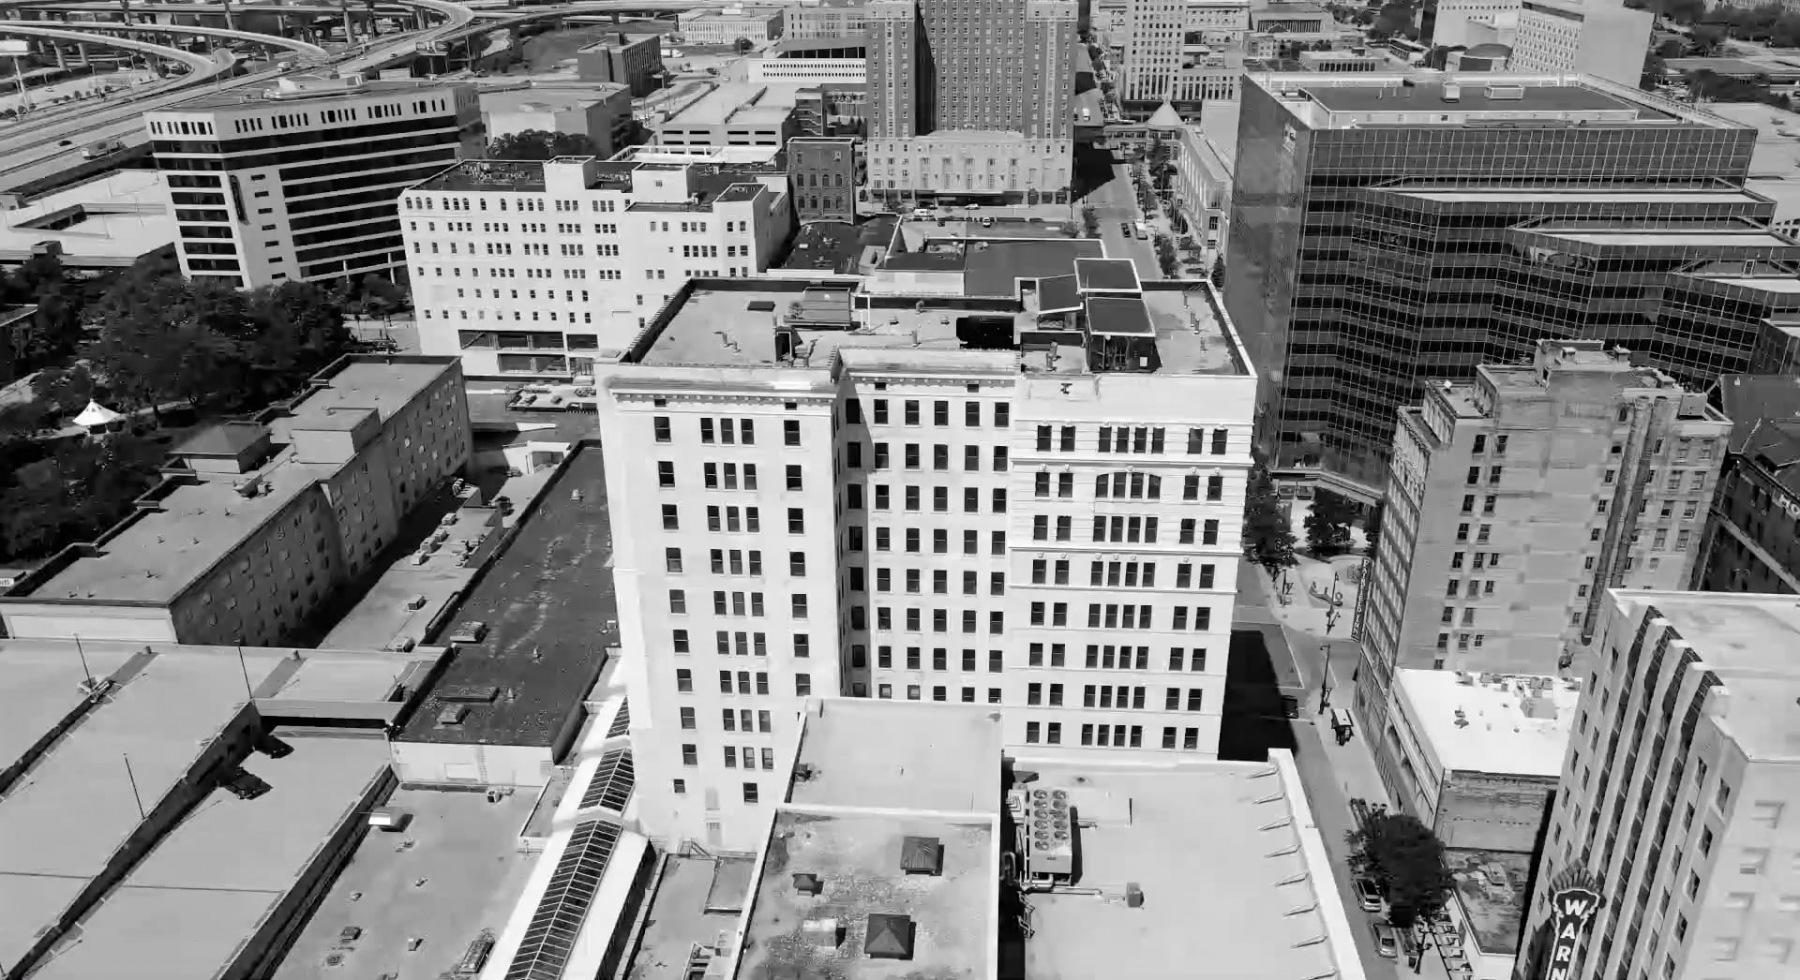 Aerial view of playbill flats